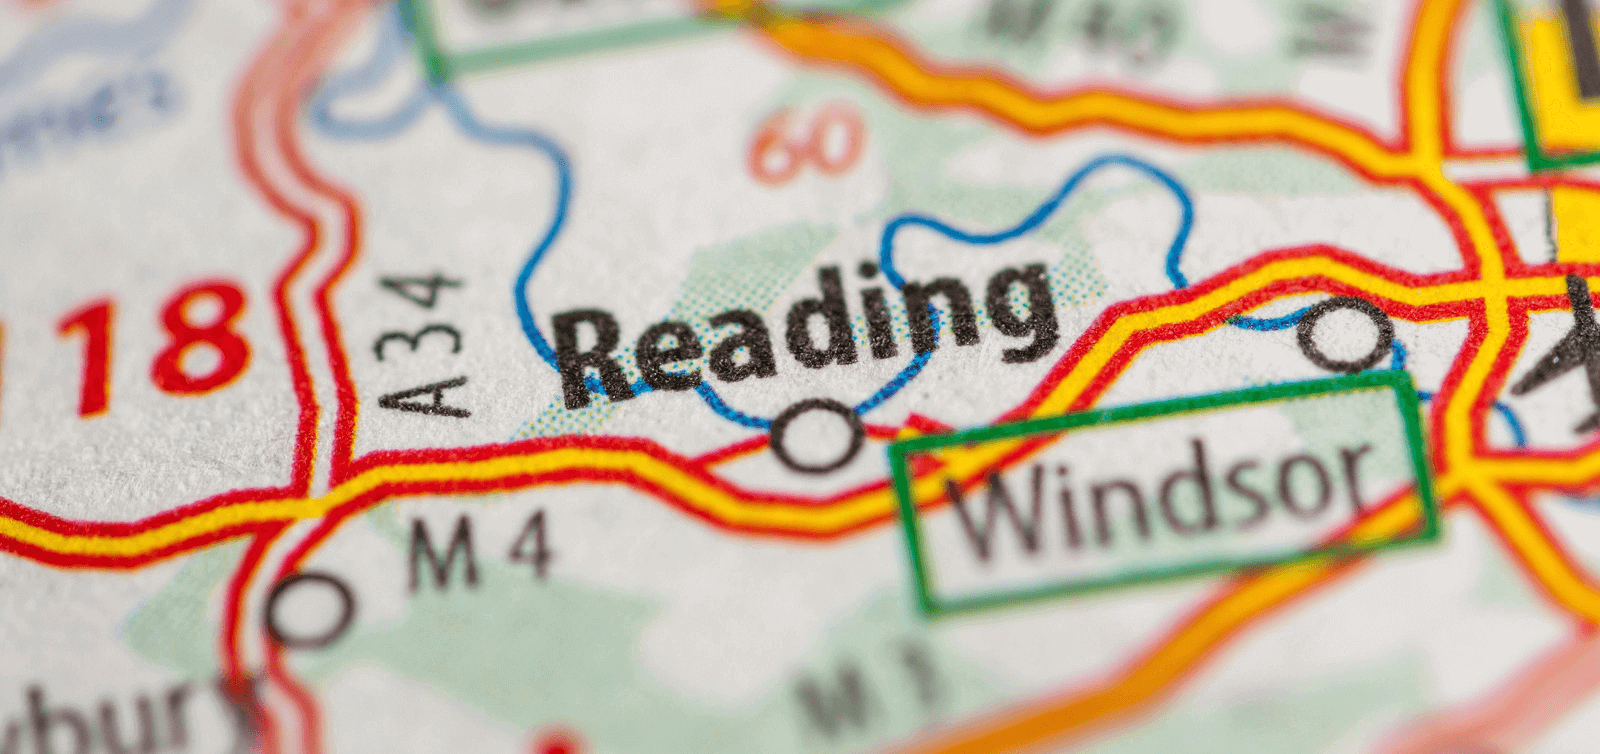 A close-up shot of a map showing Reading.